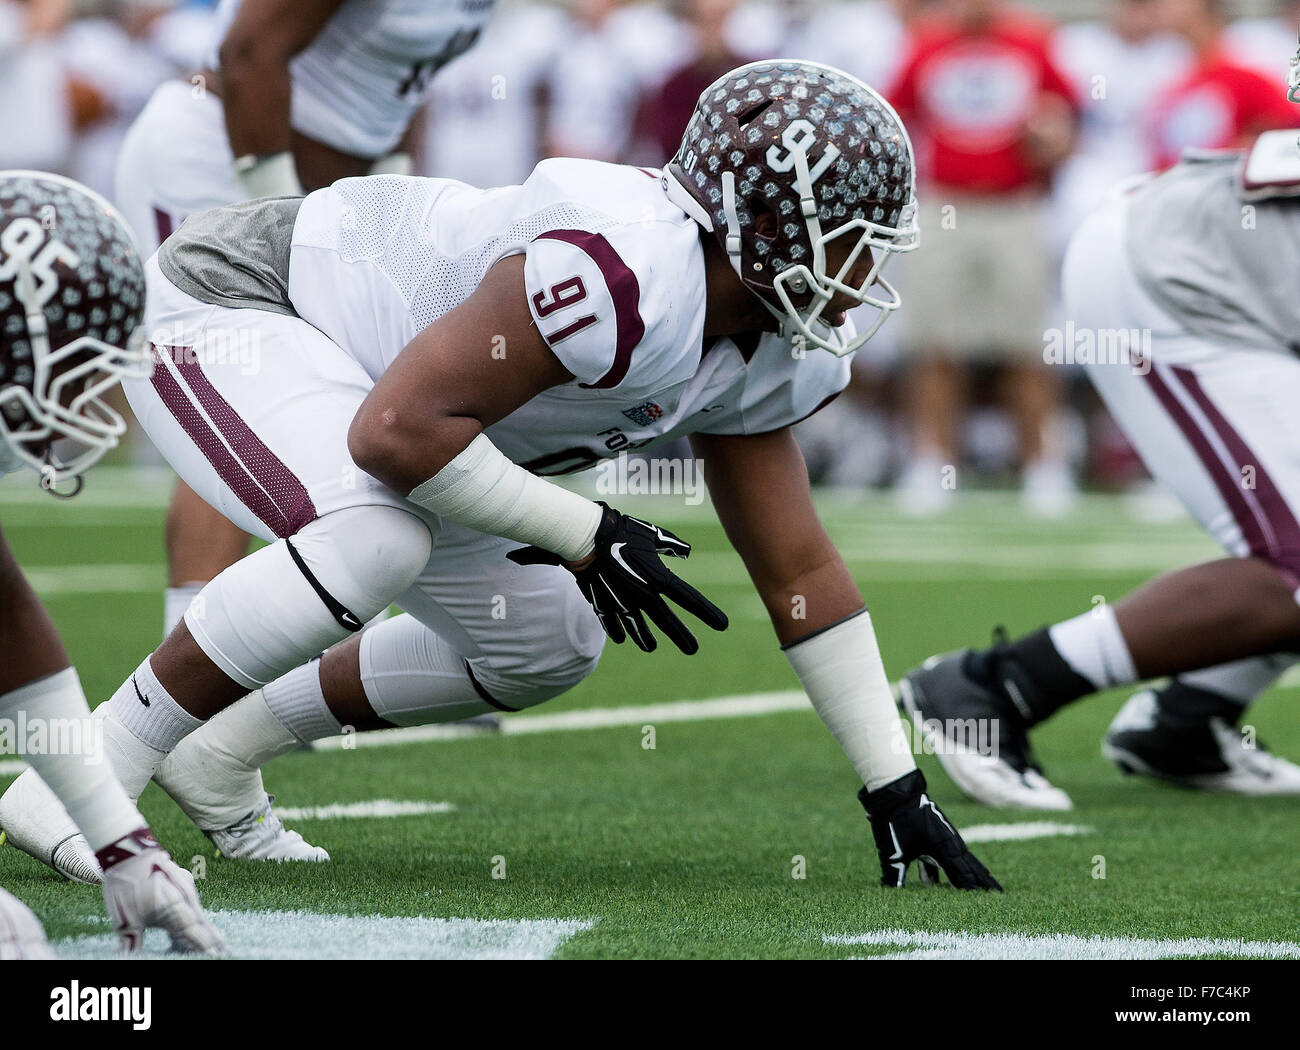 Chattanooga, Tennessee, USA. 28th Nov, 2015. Fordham Rams defensive lineman Justin Vaughn (91) during the NCAA football game between the University of Chattanooga and Fordham at Finley Stadium in Chattanooga, Tennessee. Gary Fain/CSM/Alamy Live News Stock Photo